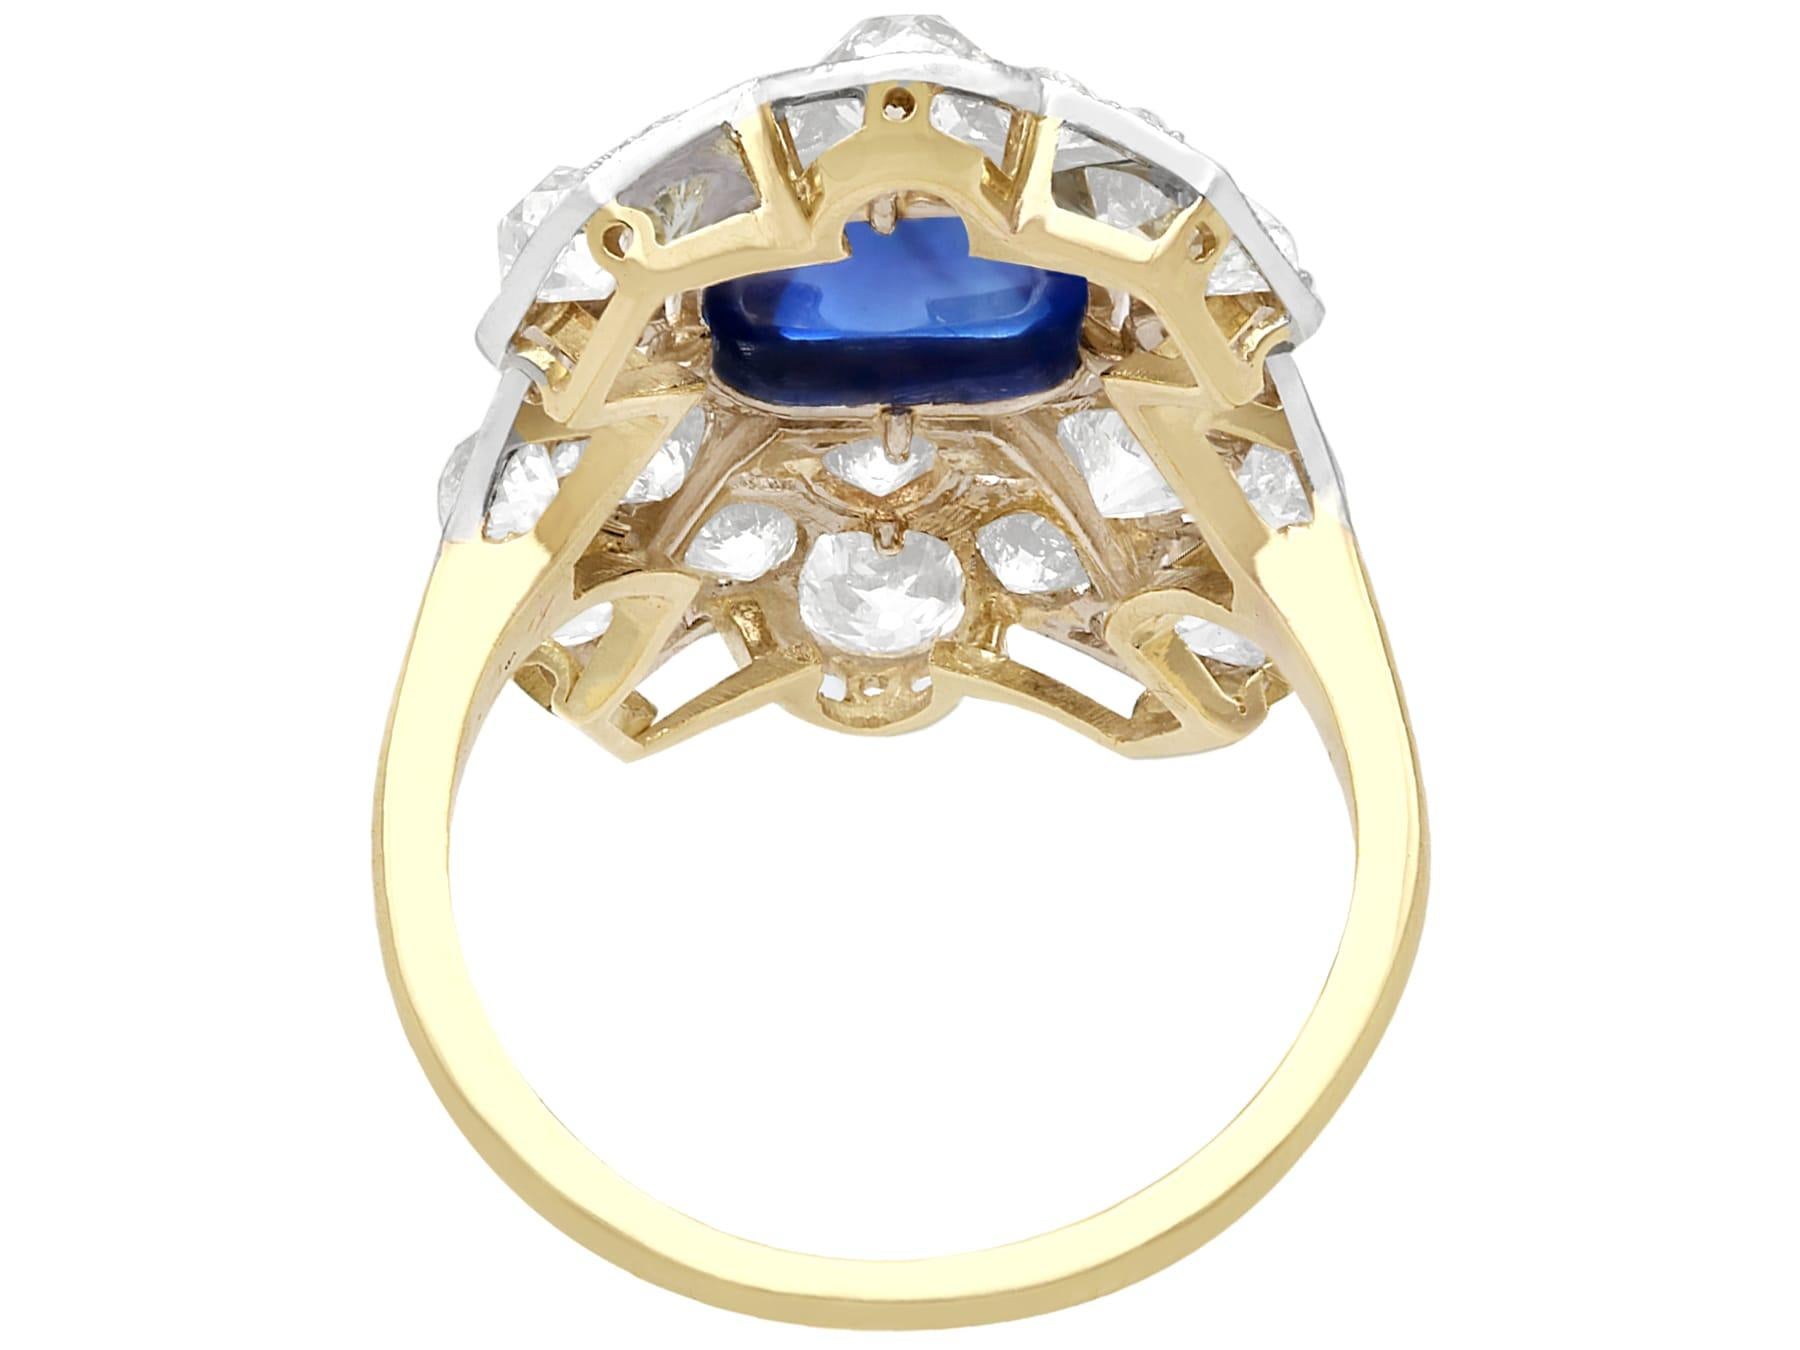 Old European Cut Antique 2.02 Carat Sapphire and 2.78 Carat Diamond Yellow Gold Cocktail Ring For Sale